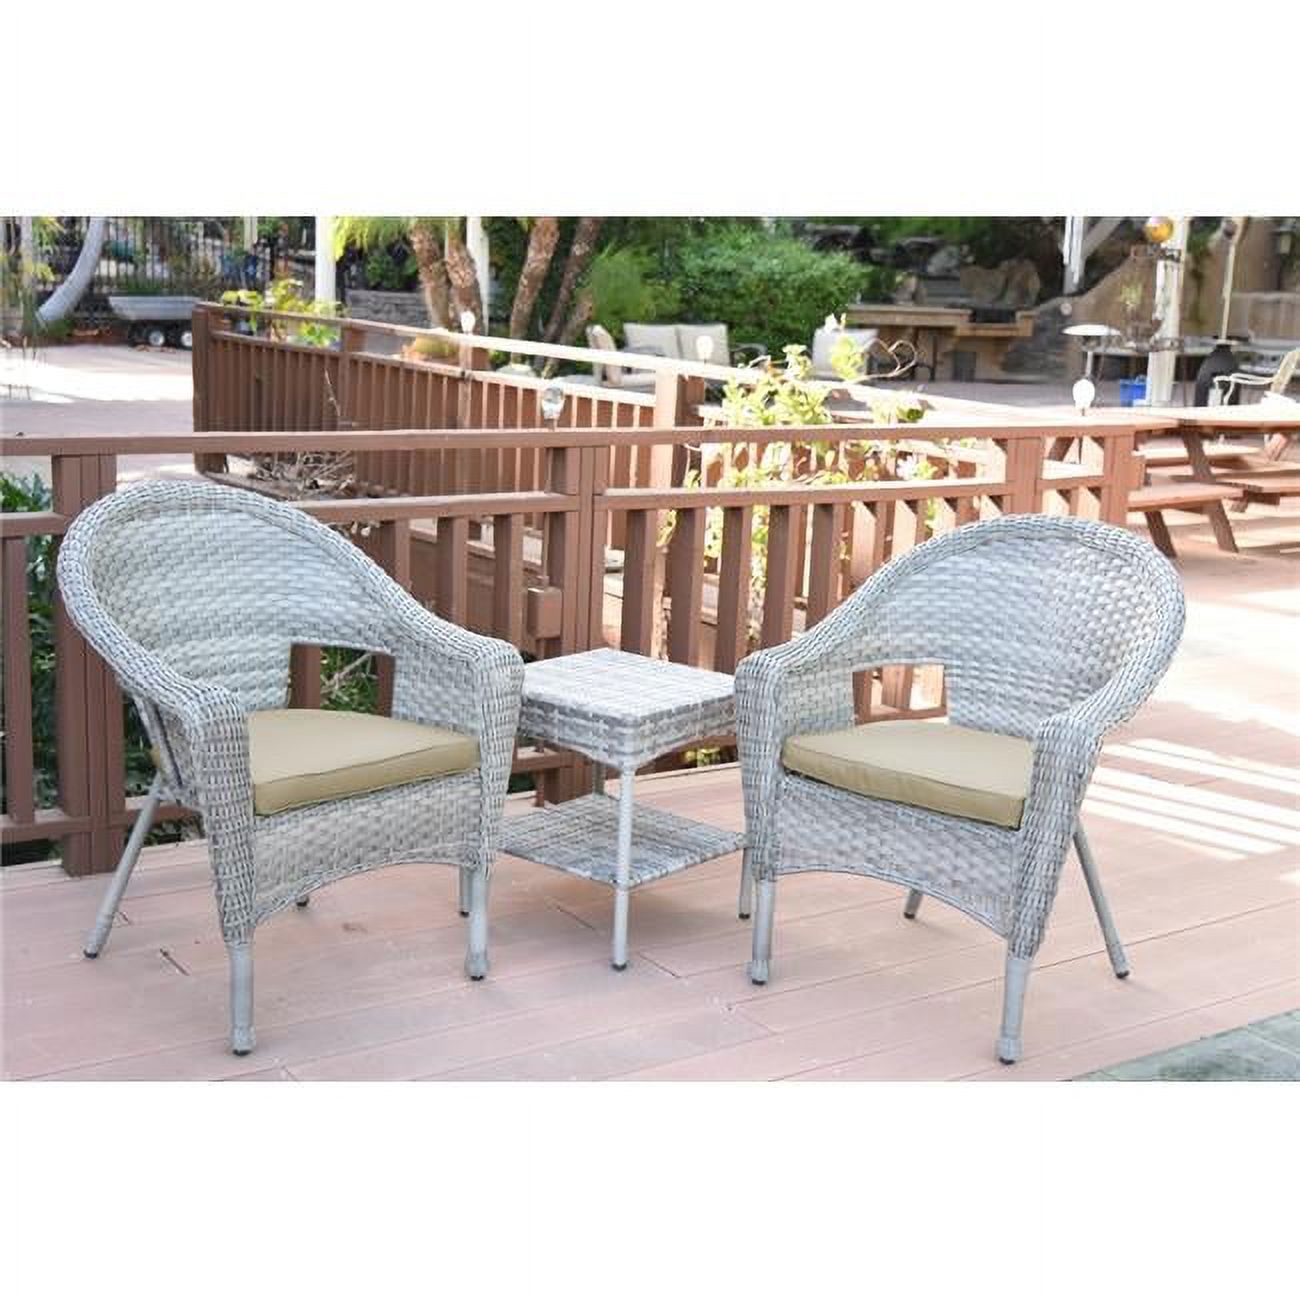 Jeco Clark 3 Piece Wicker Patio Conversation Set in Gray and Green - image 1 of 2